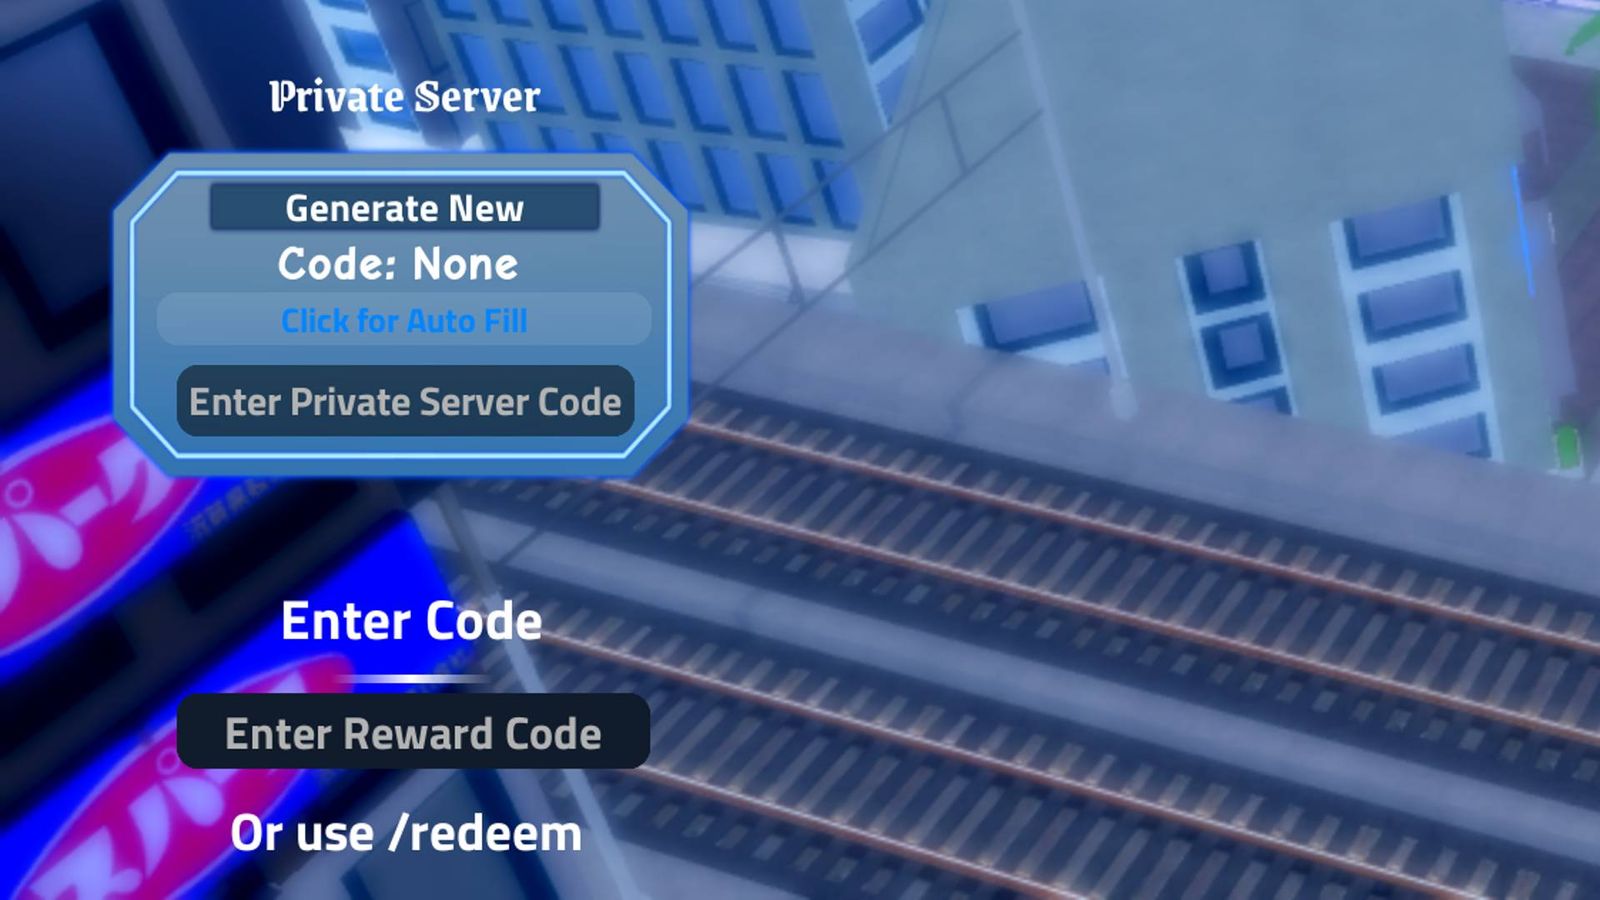 The code redemption screen in World of Power on Roblox.